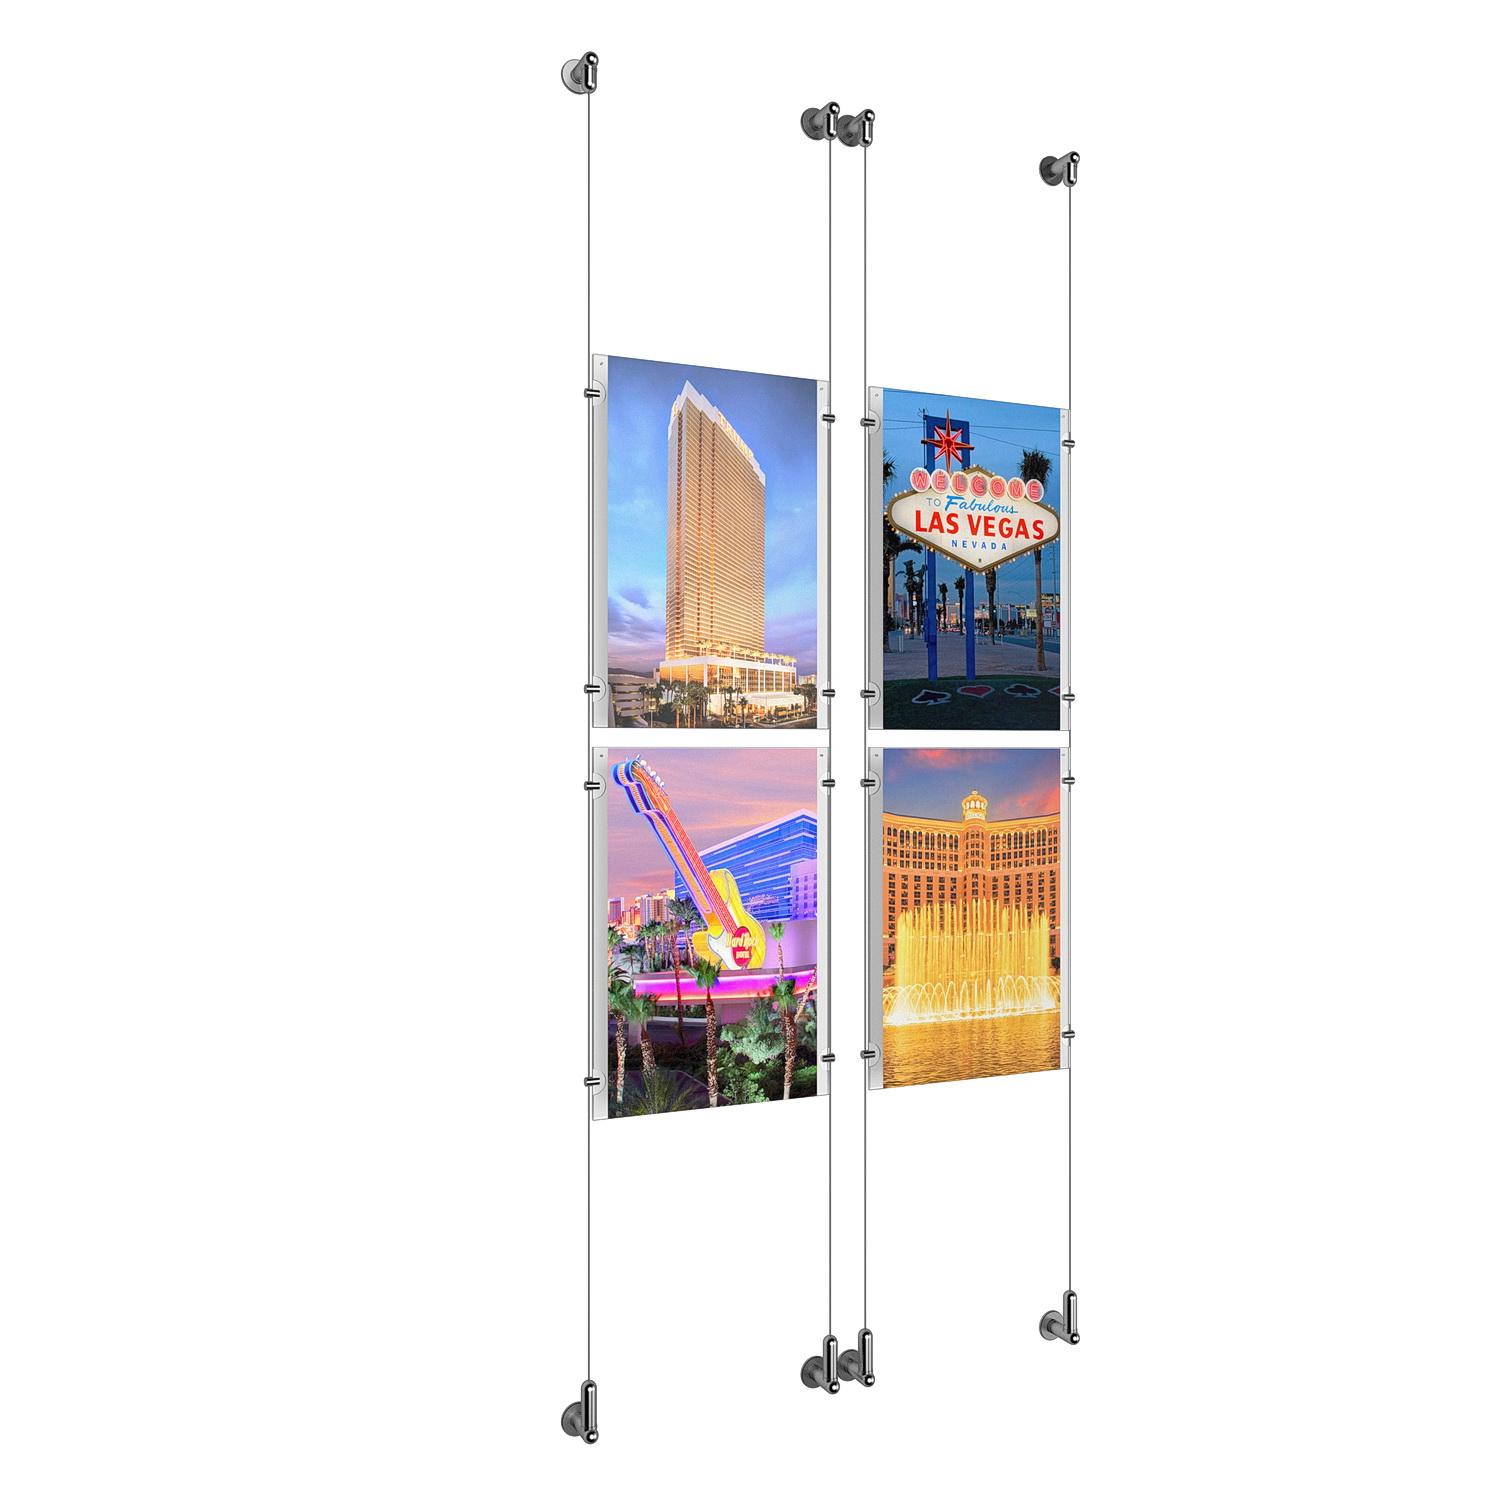 (4) 11'' Width x 17'' Height Clear Acrylic Frame & (4) Wall-to-Wall Aluminum Clear Anodized Cable Systems with (16) Single-Sided Panel Grippers